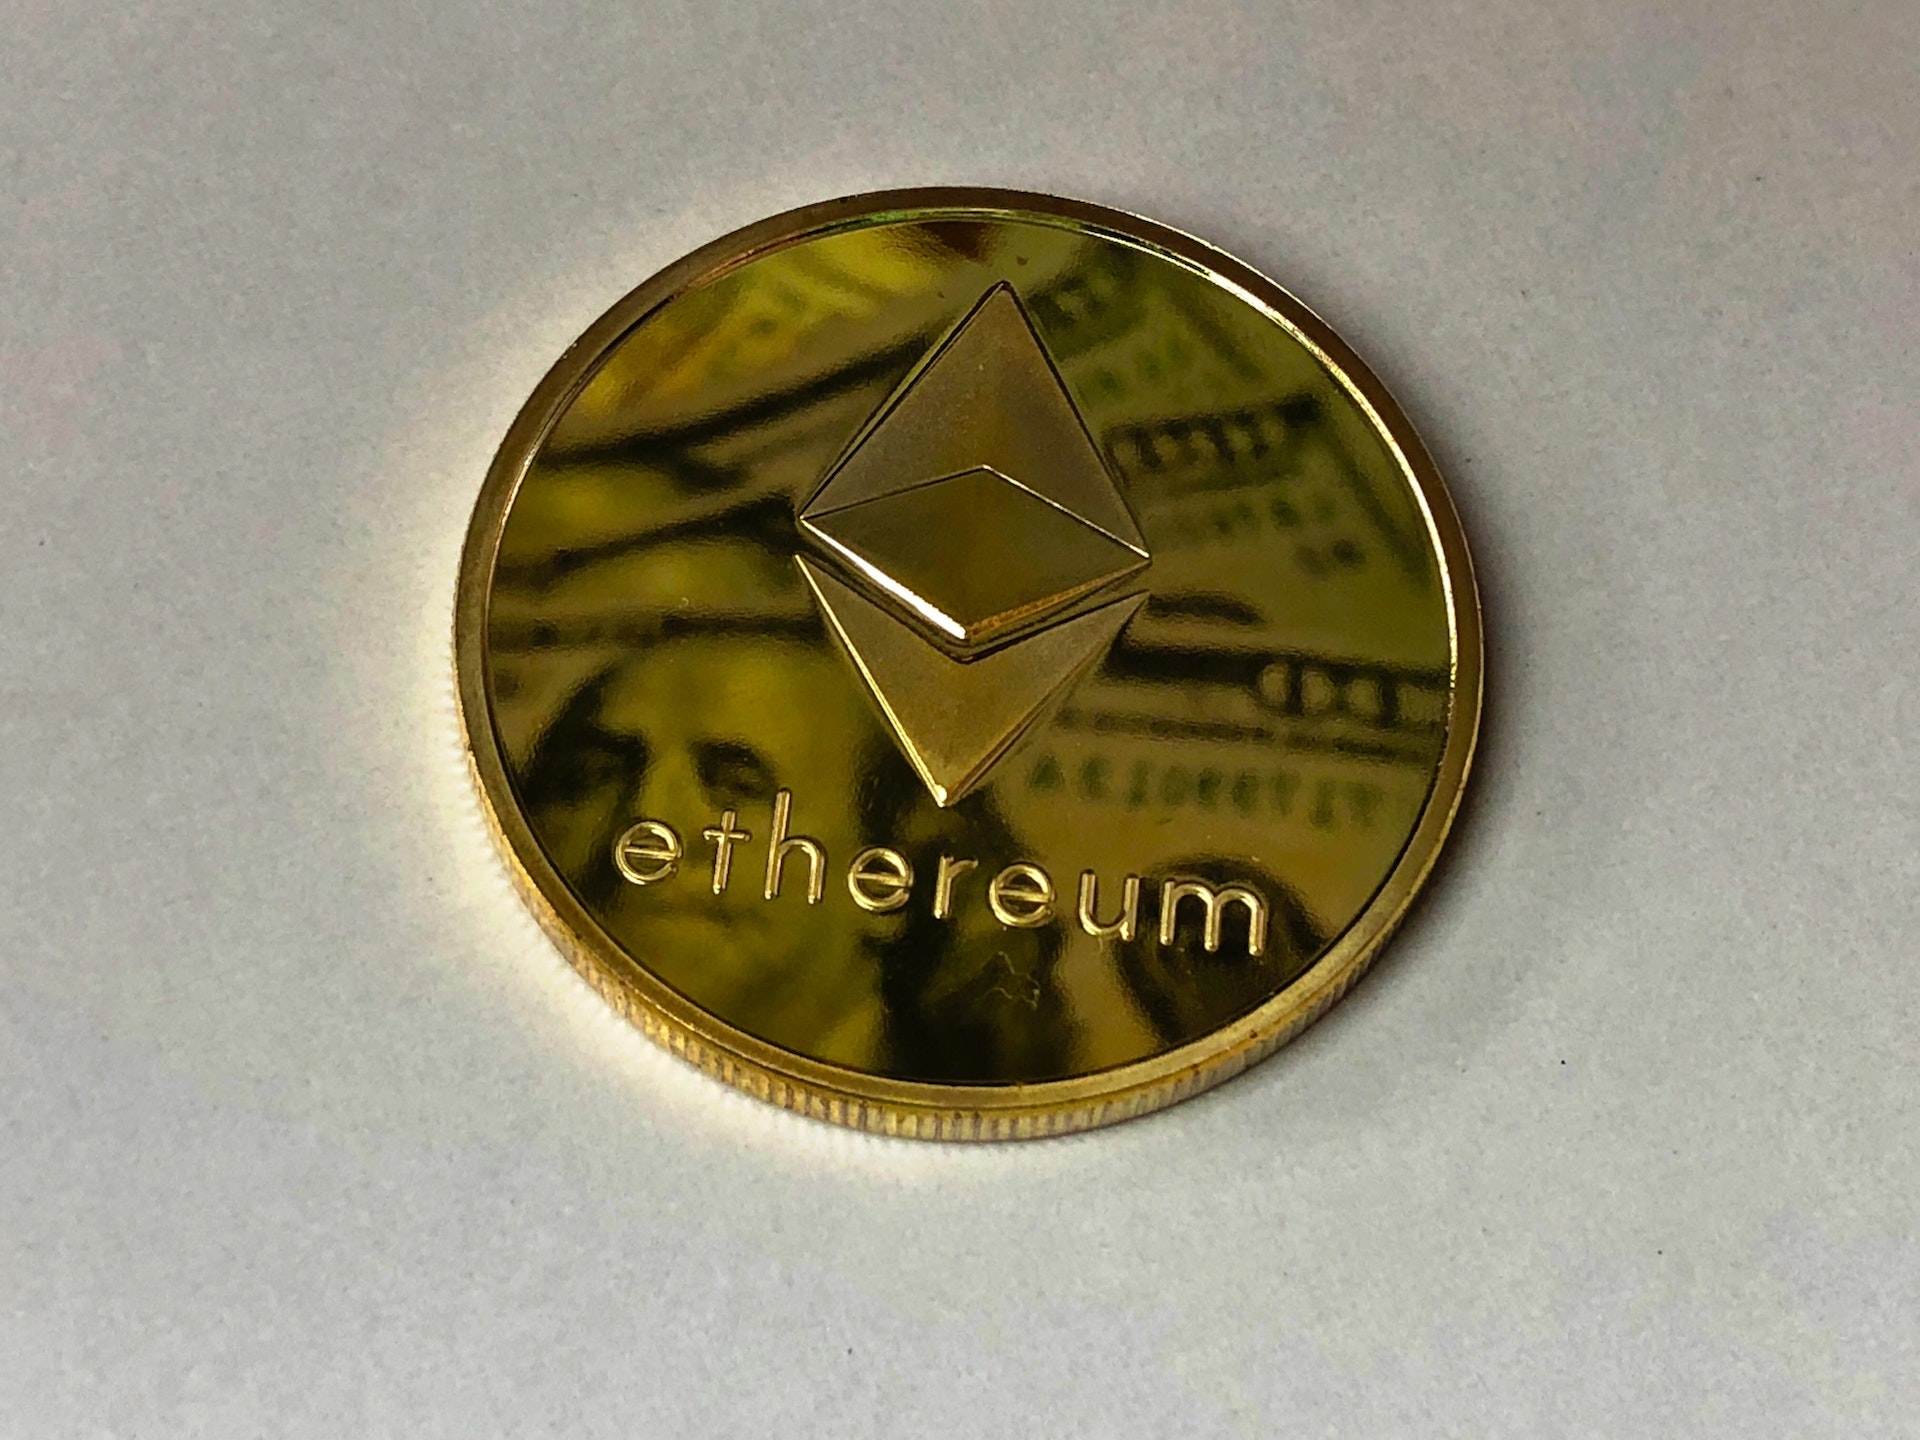 stock photo of an ethereum cryptocurrency token